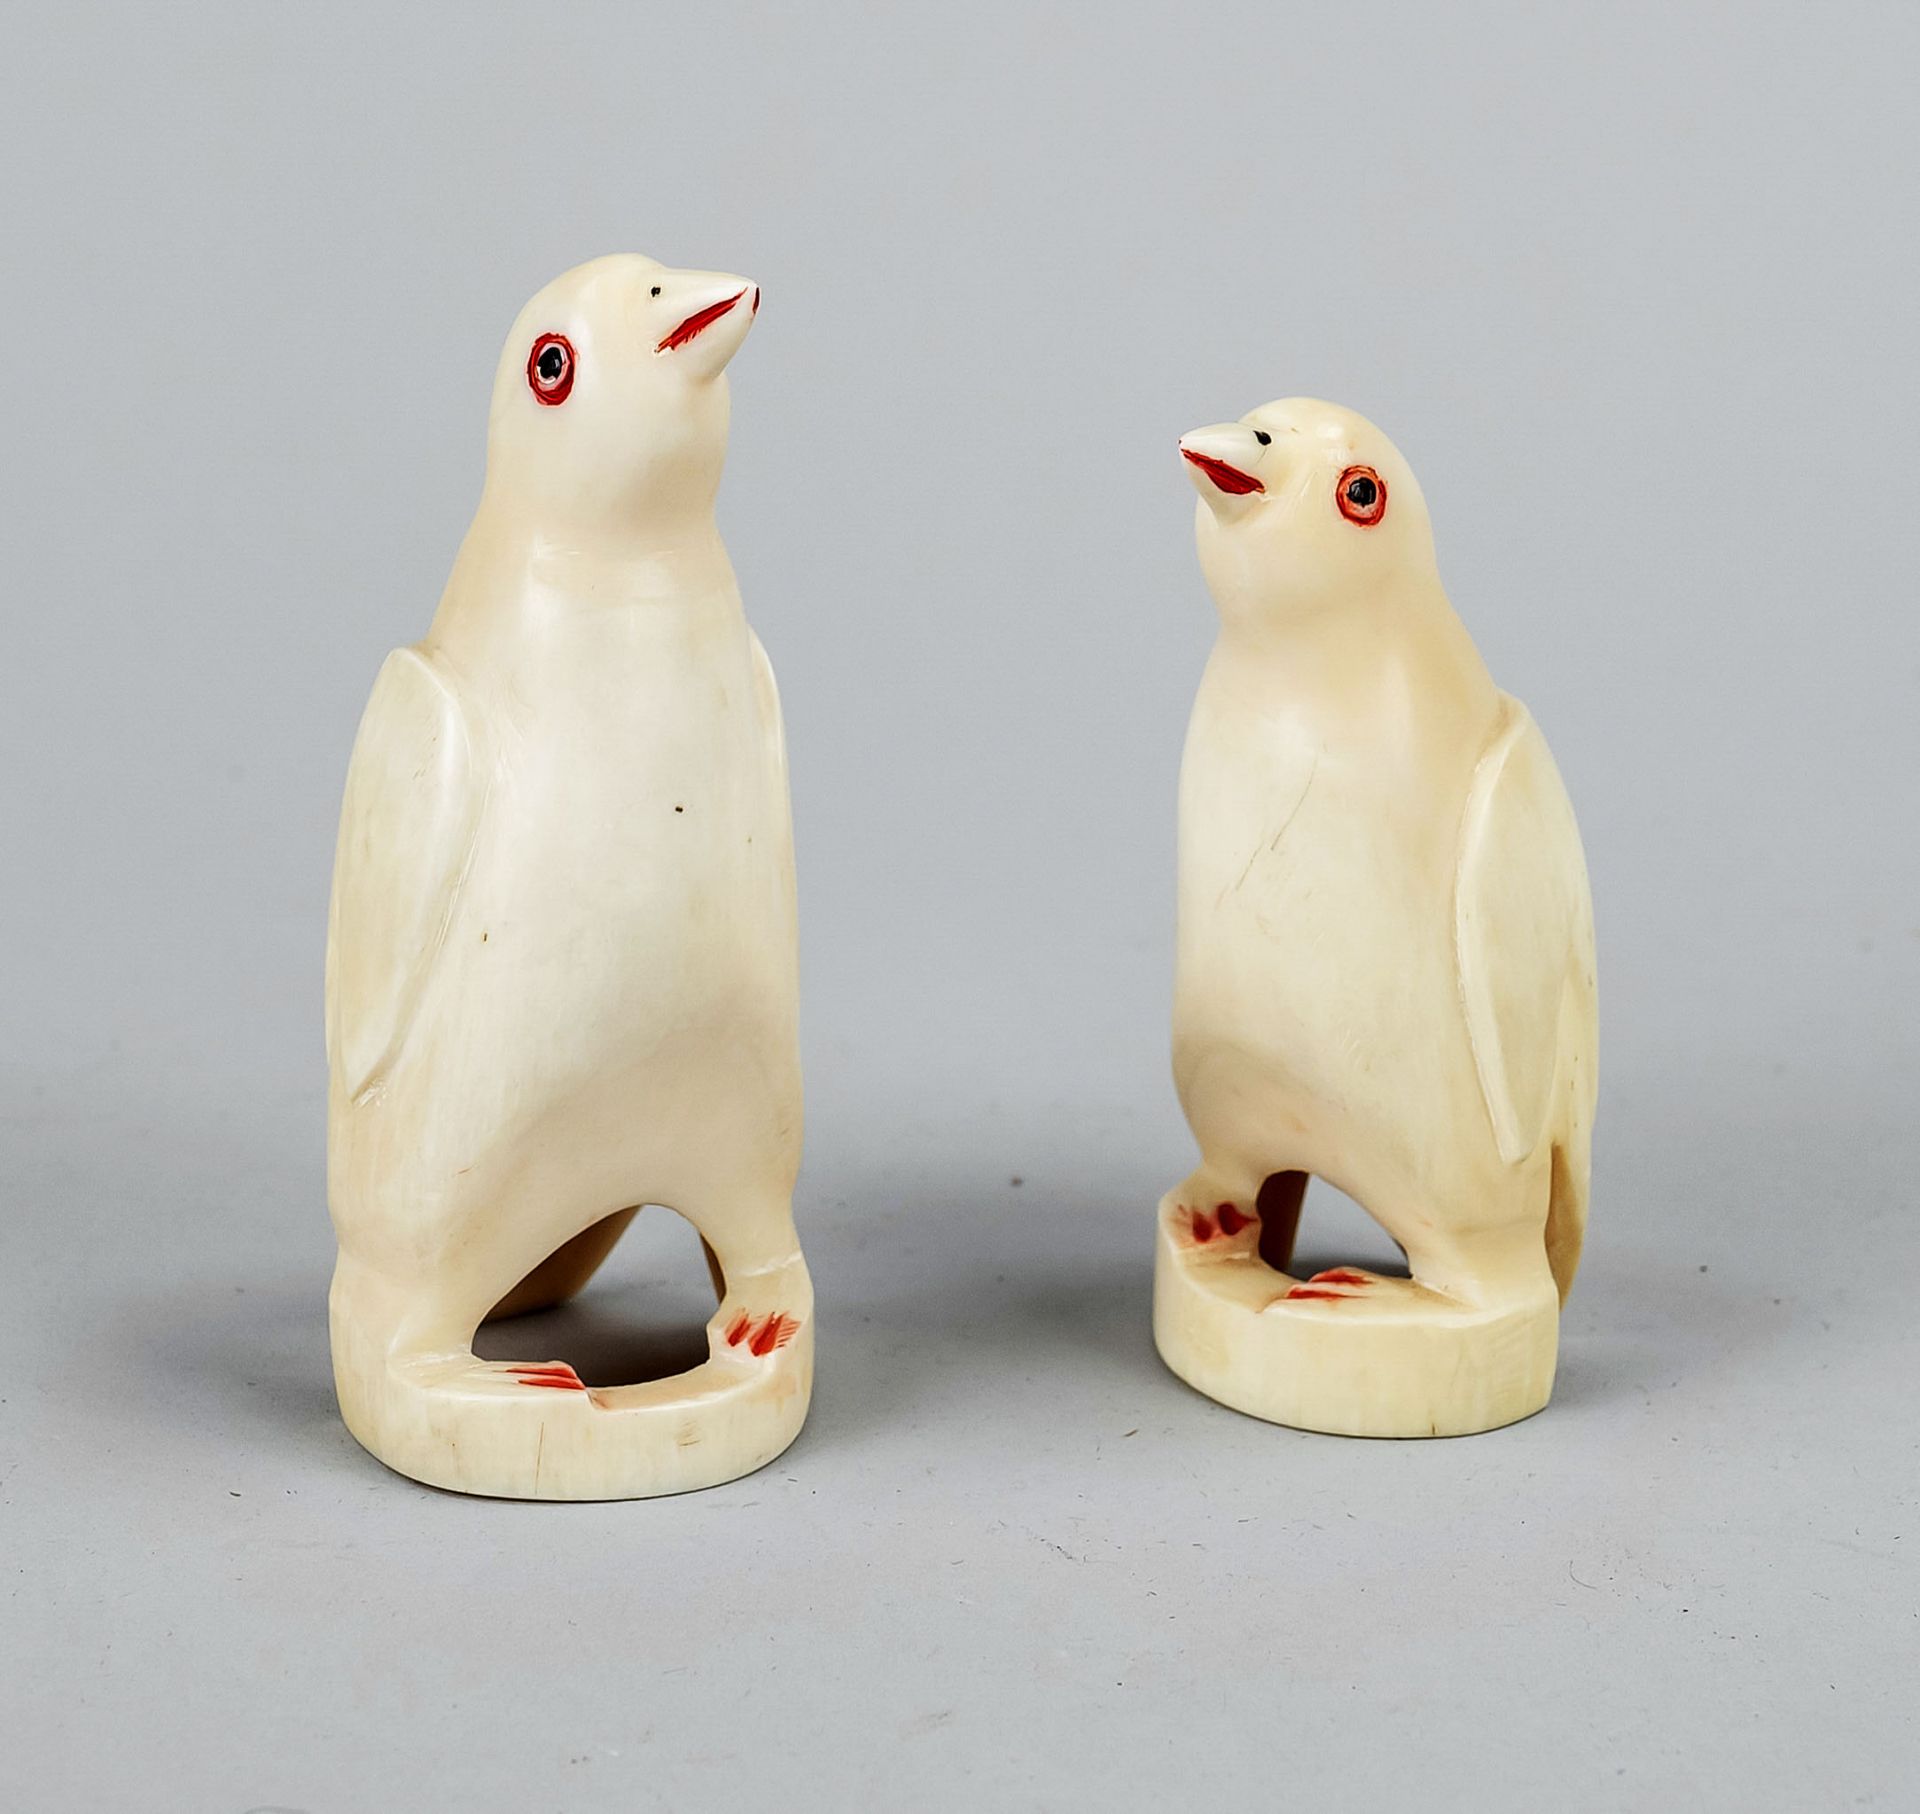 Pair of figurally carved walrus teeth, mid 20th c., partially color painted penguins, h. 8 & 10 cm